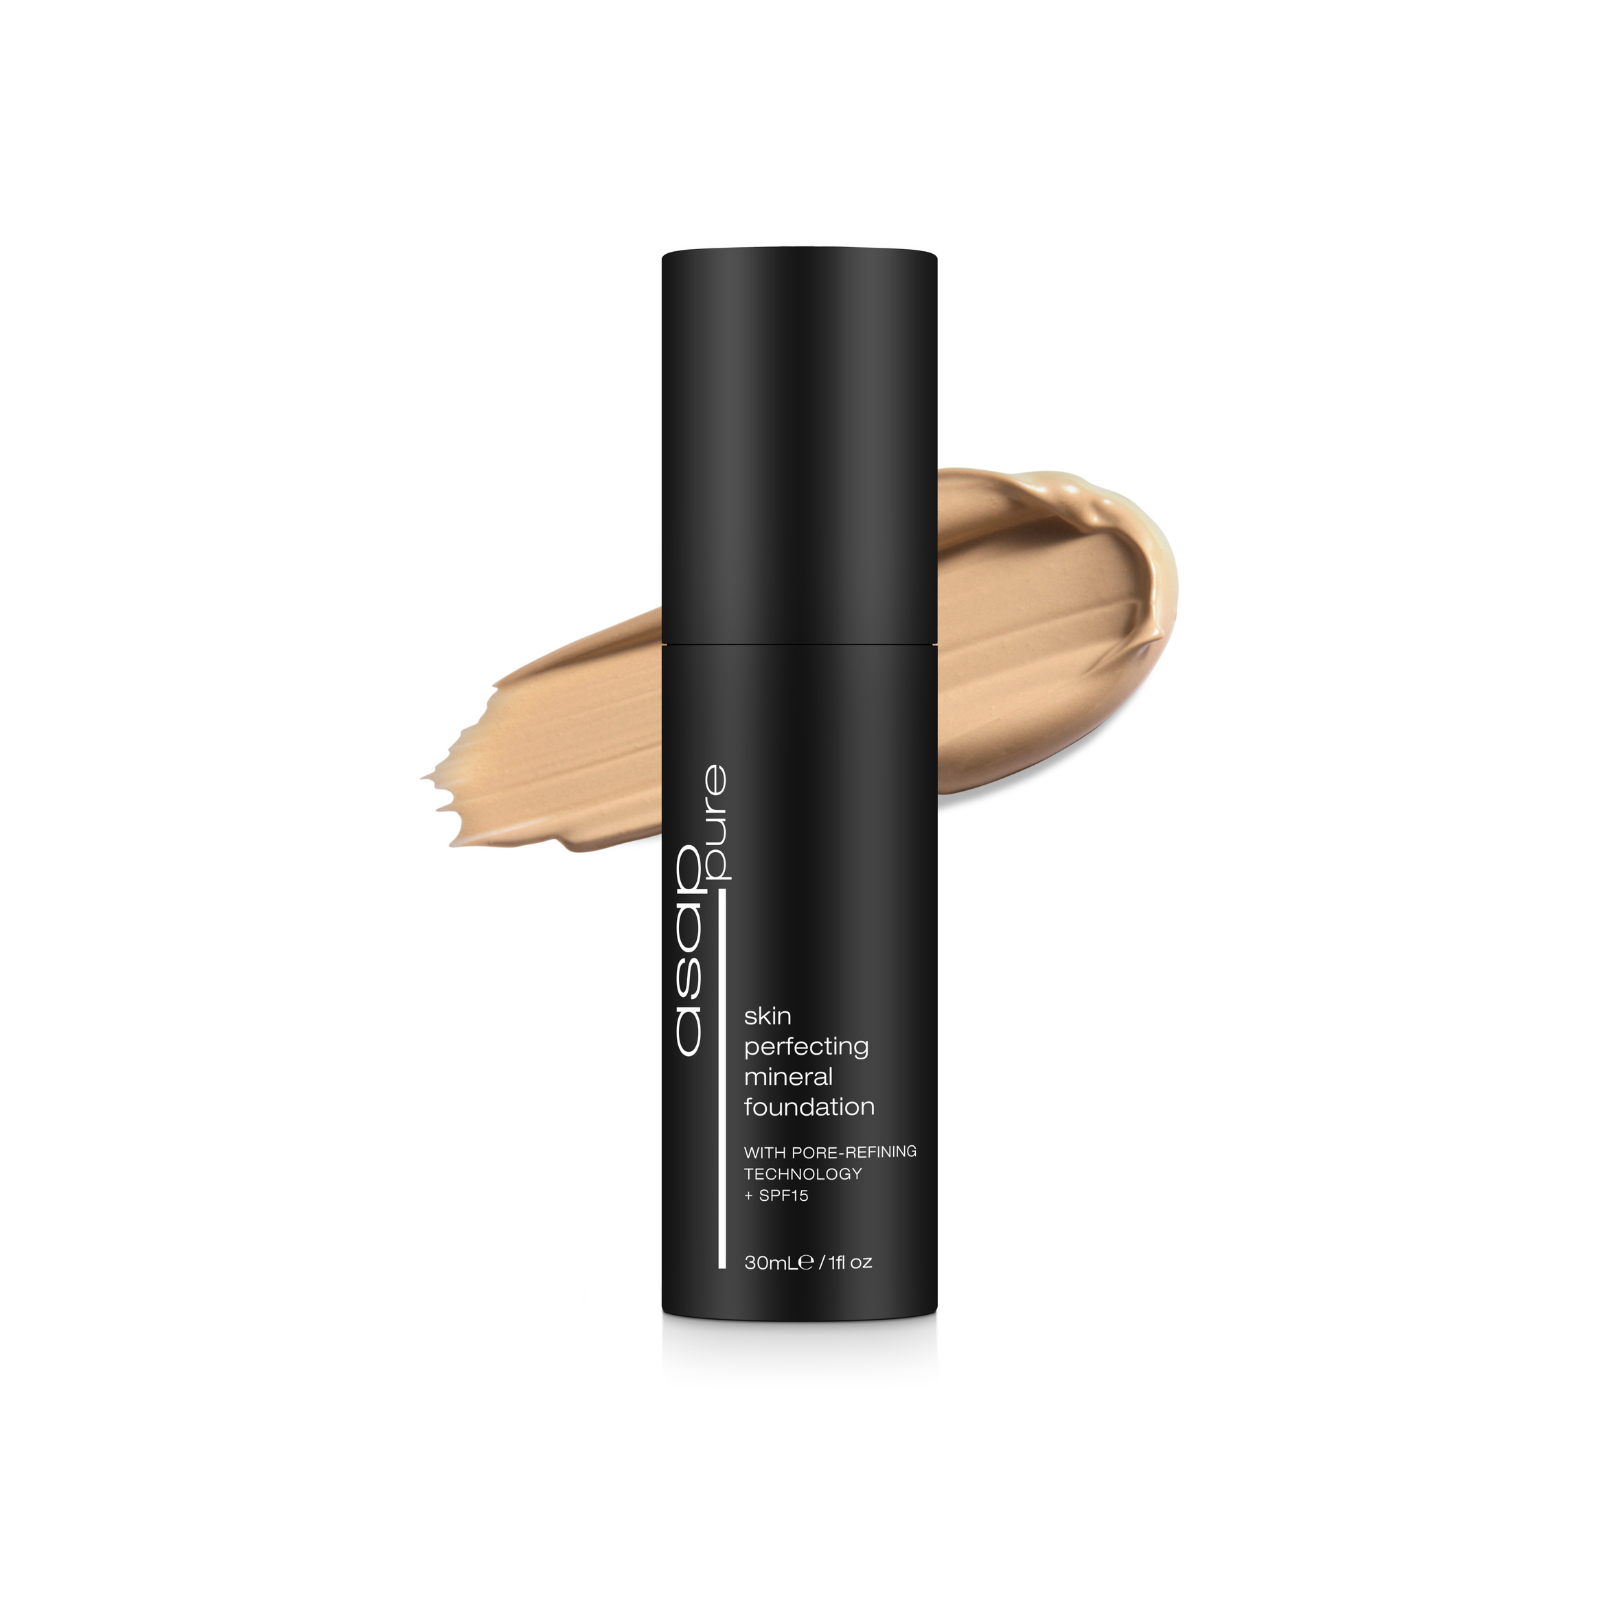 ASAP Skin Perfecting Mineral Foundation with Pore-Refining Technology + SPF15 - Pure One 30ml